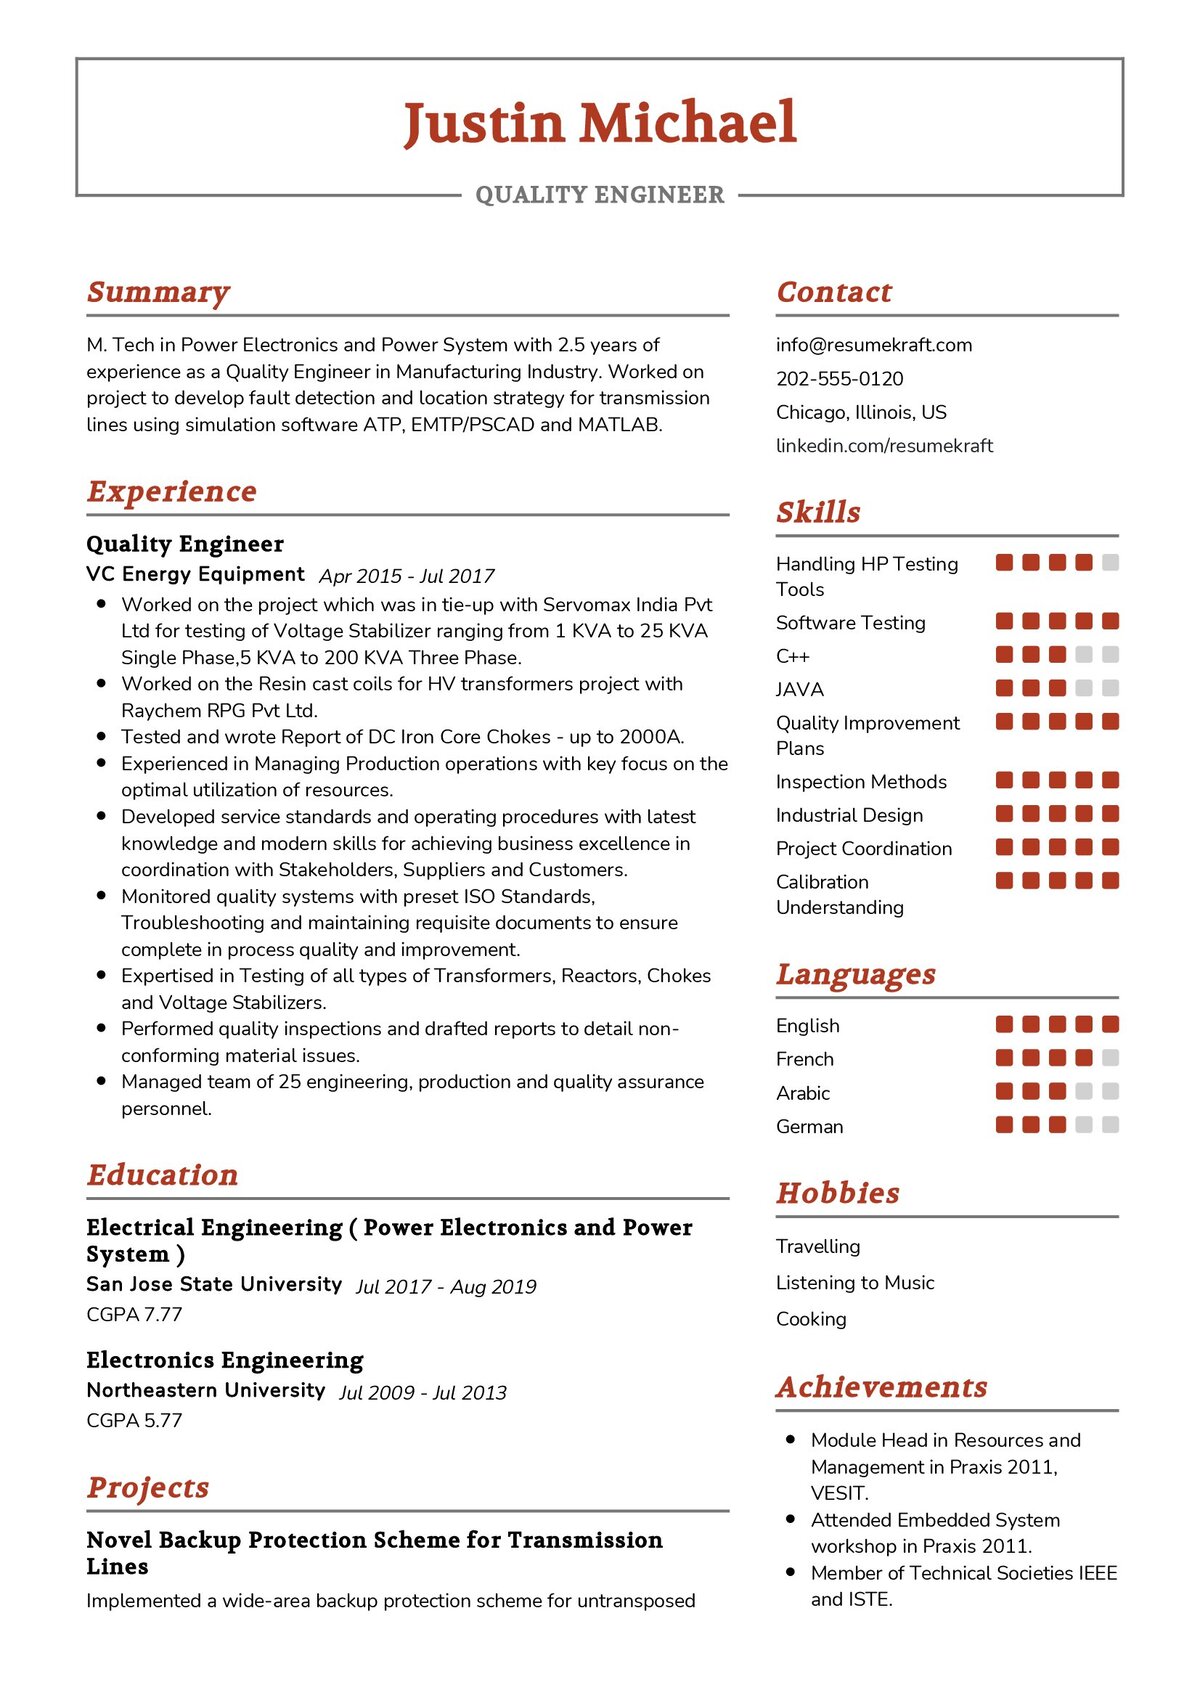 resume format for quality engineer pdf